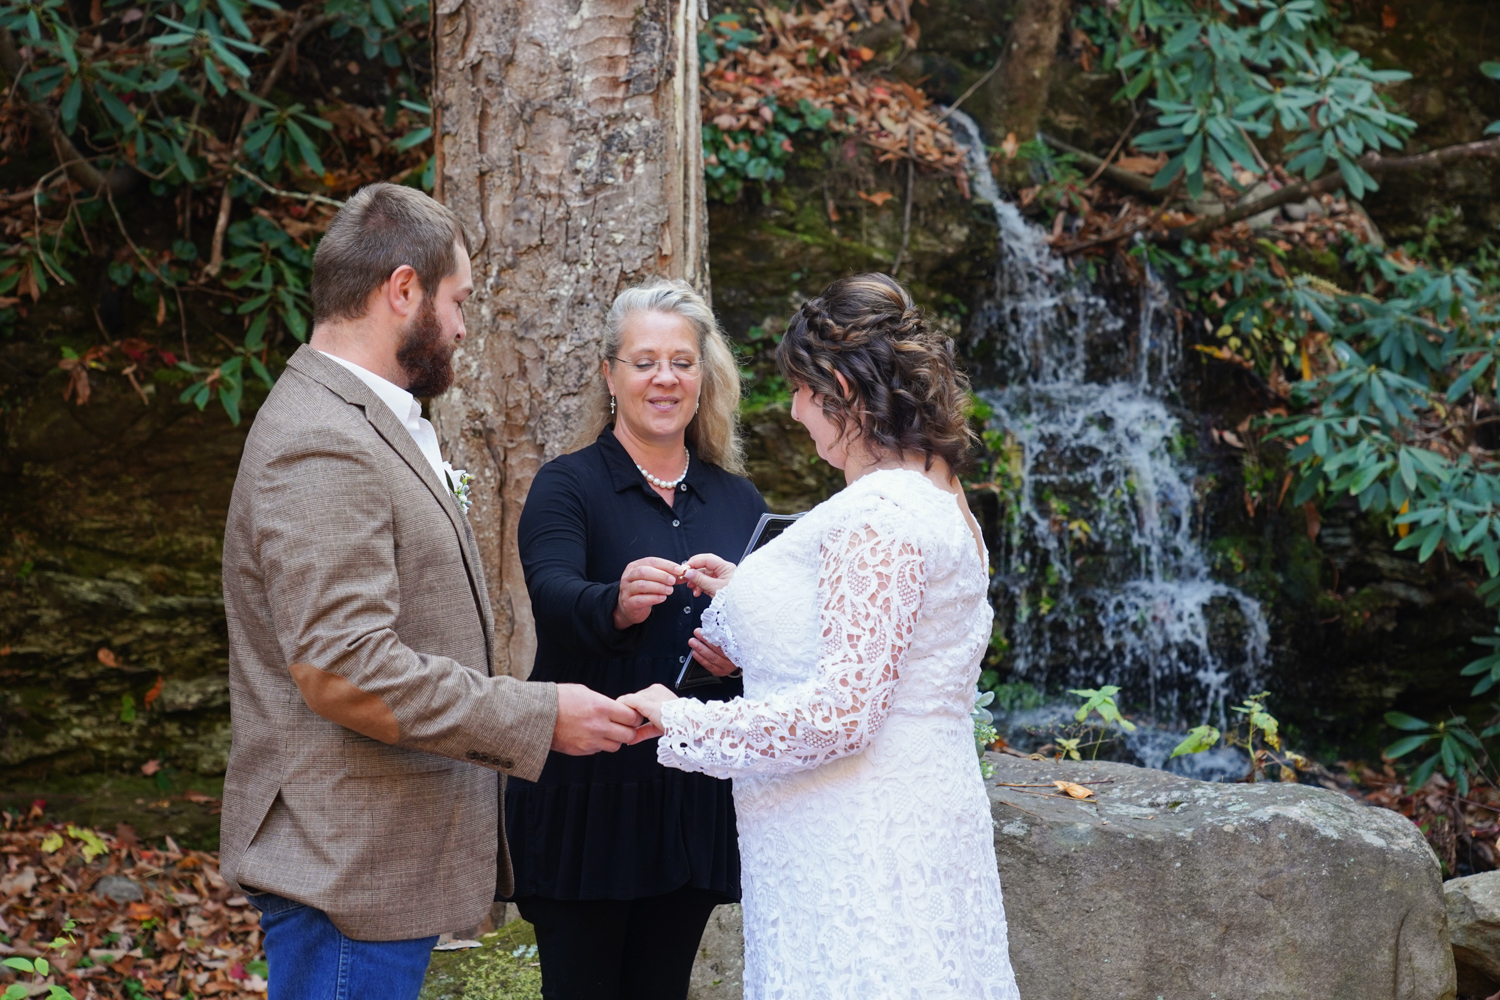 Officiant Regina Starkey handing a ring to a bride at a Smoky Mountain waterfall ceremony site in Pigeon Forge